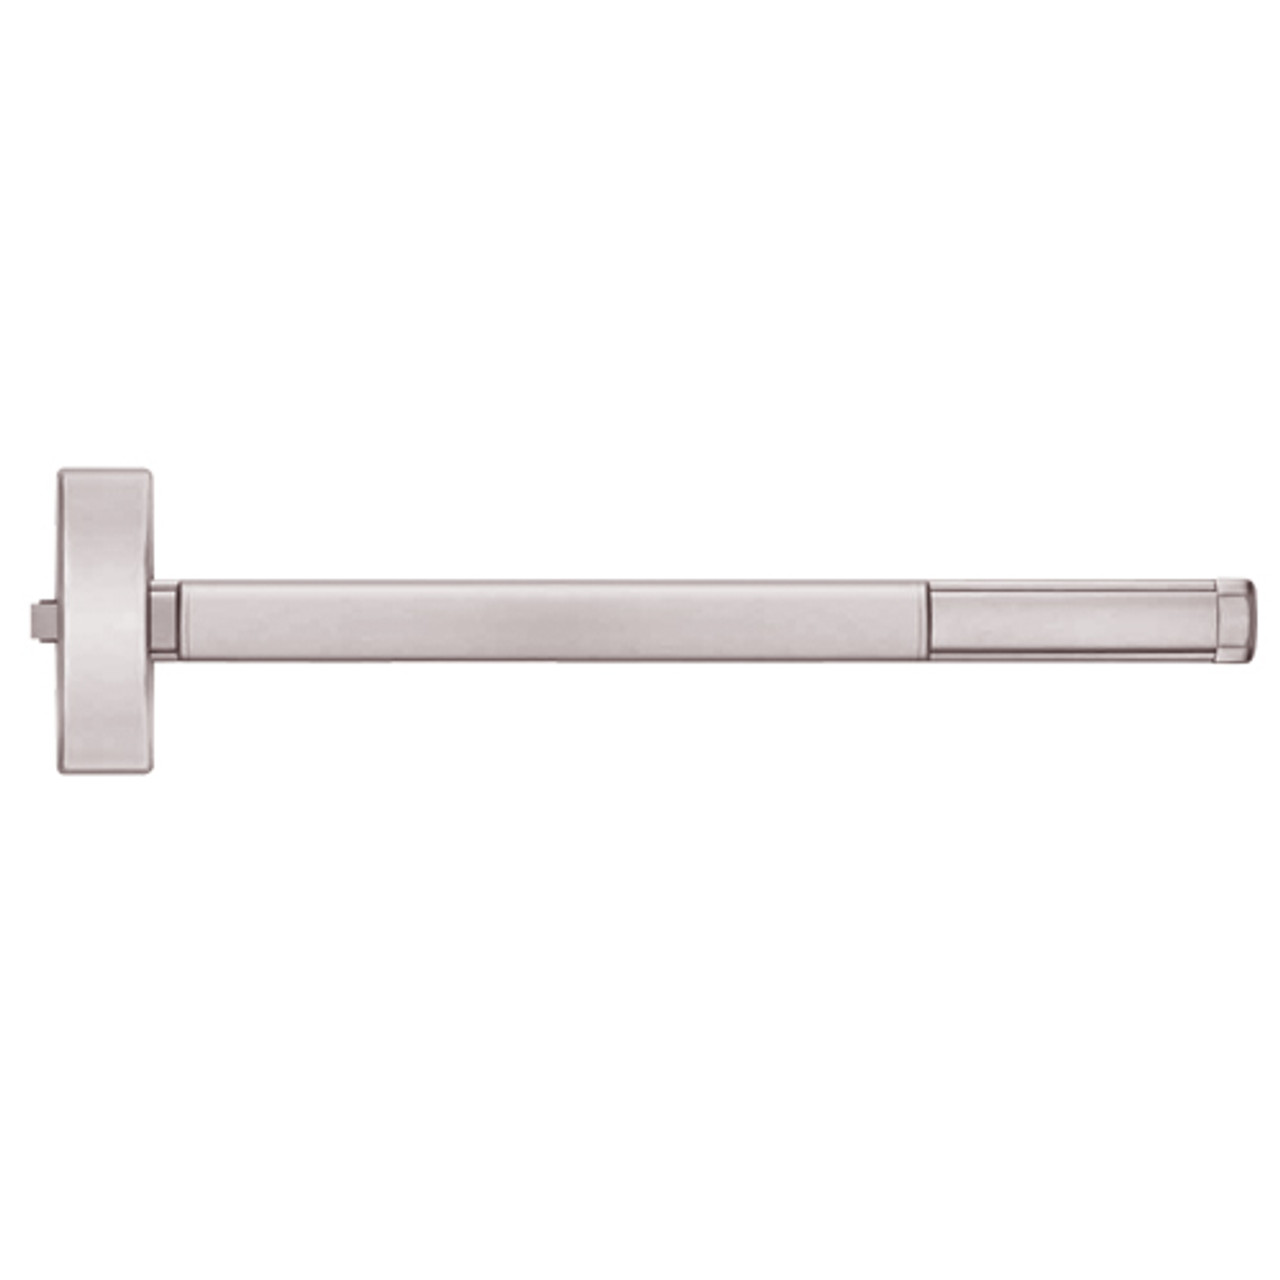 DEFL2103-628-36 PHI 2100 Series Fire Rated Apex Rim Exit Device with Delayed Egress Prepped for Key Retracts Latchbolt in Satin Aluminum Finish